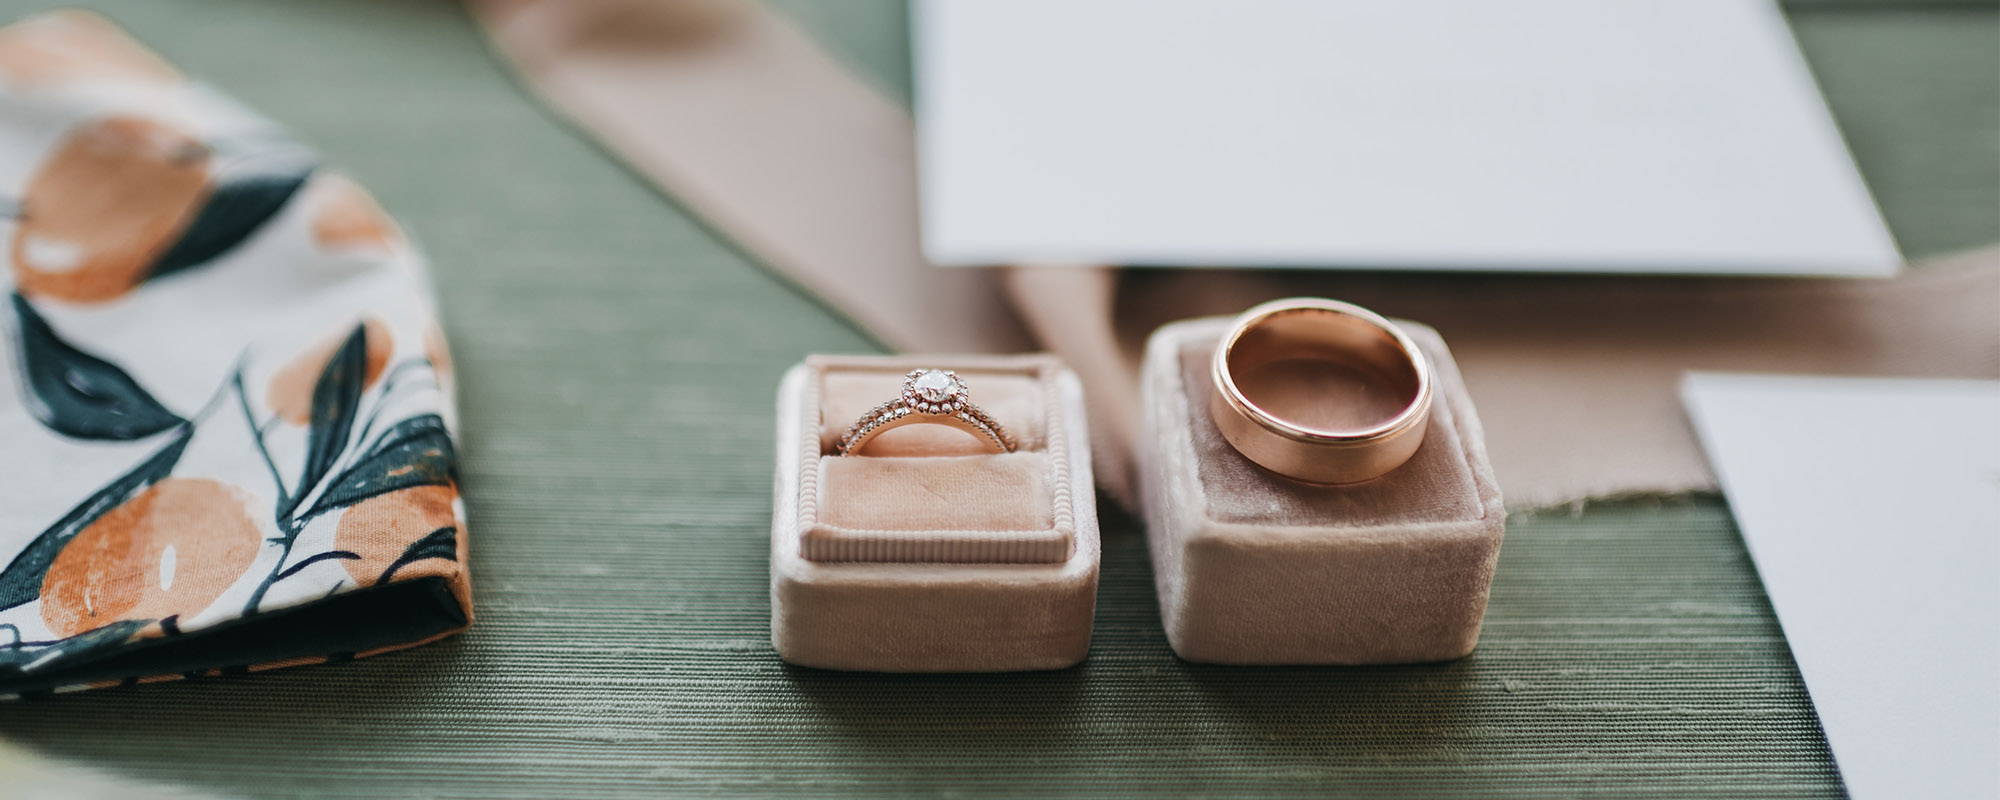 Choosing A Wedding Ring: What You Need to Know